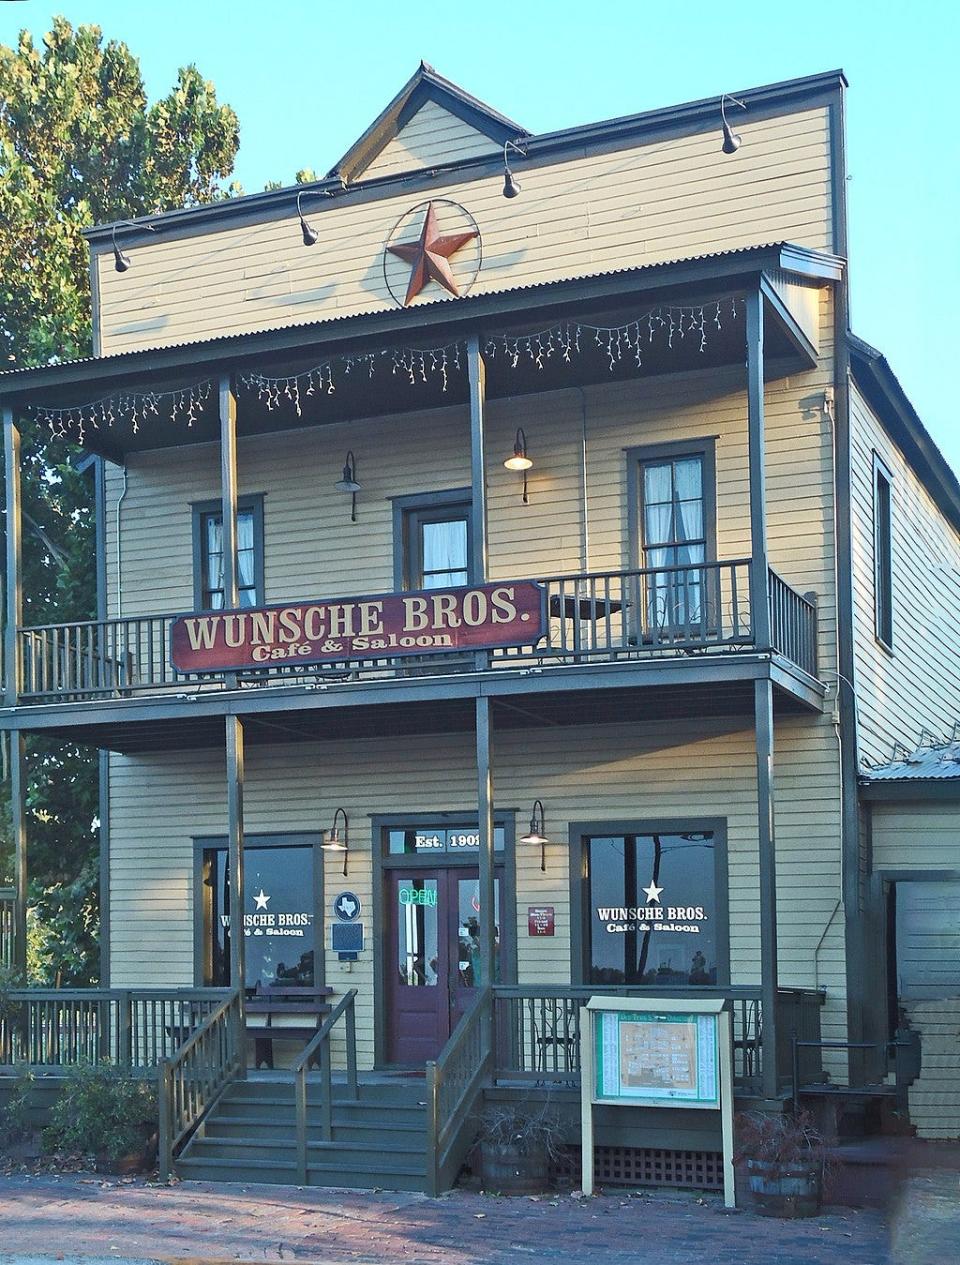 The 1902 Wunsche Bros. Café and Saloon is part of a district of historic buildings that attracts tourist to Old Town Spring north of Houston.